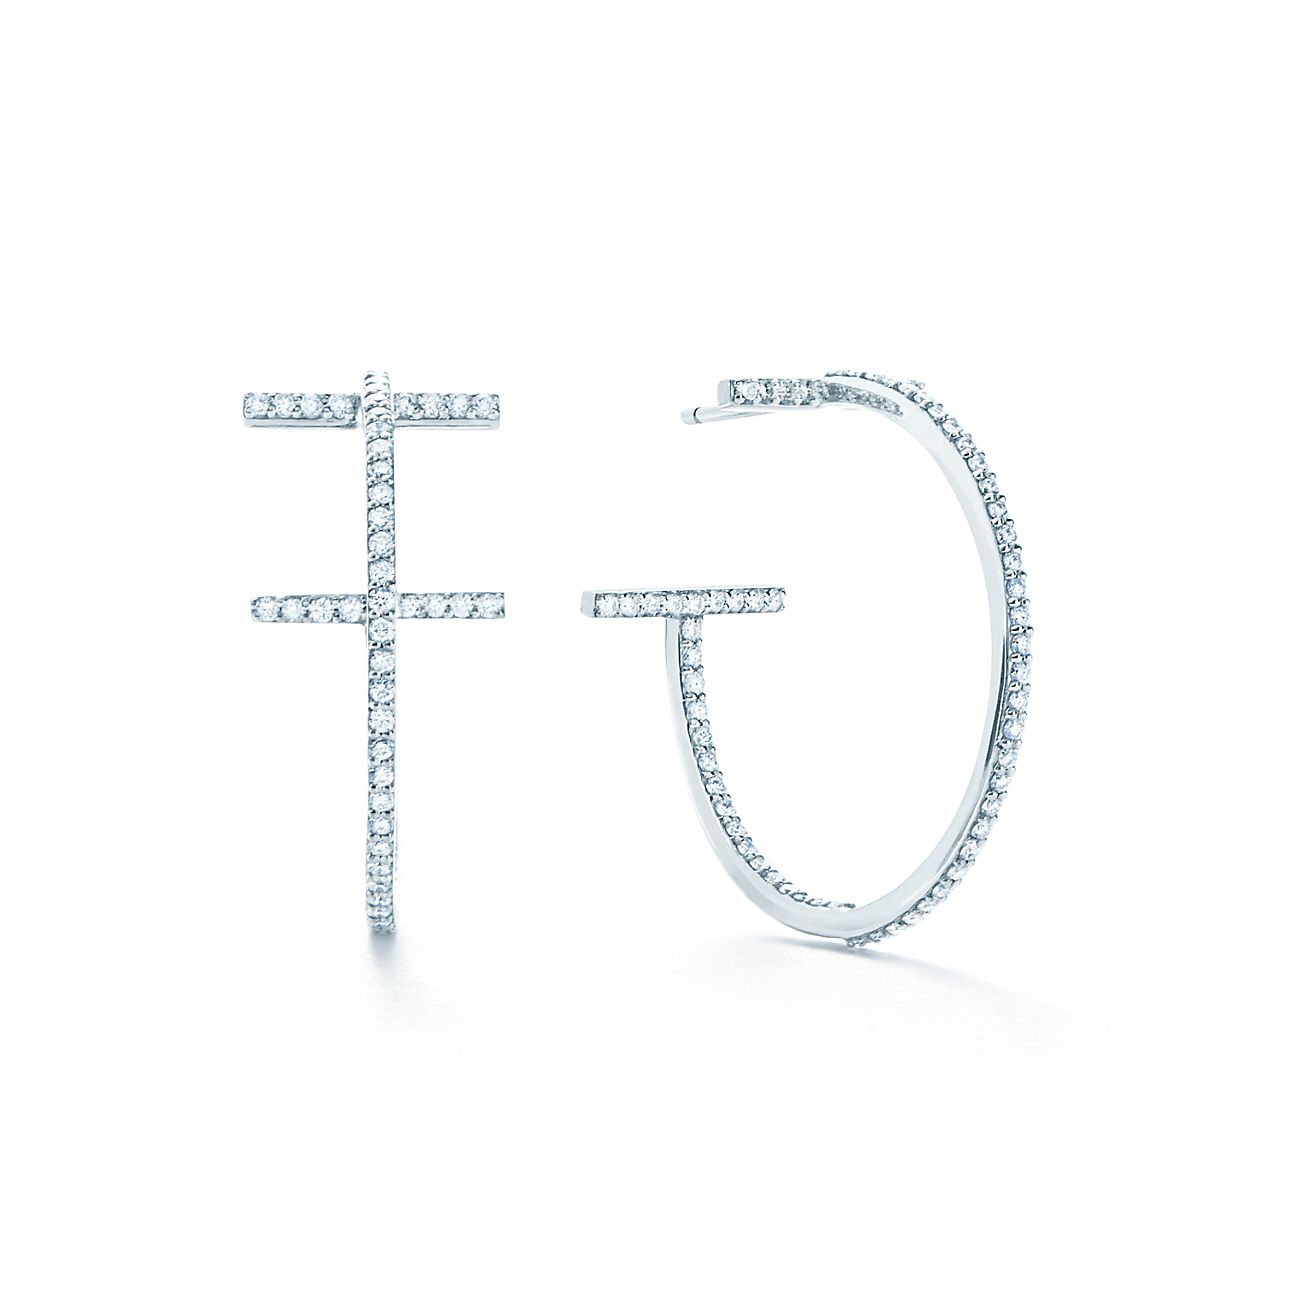 tiffany and co t earrings